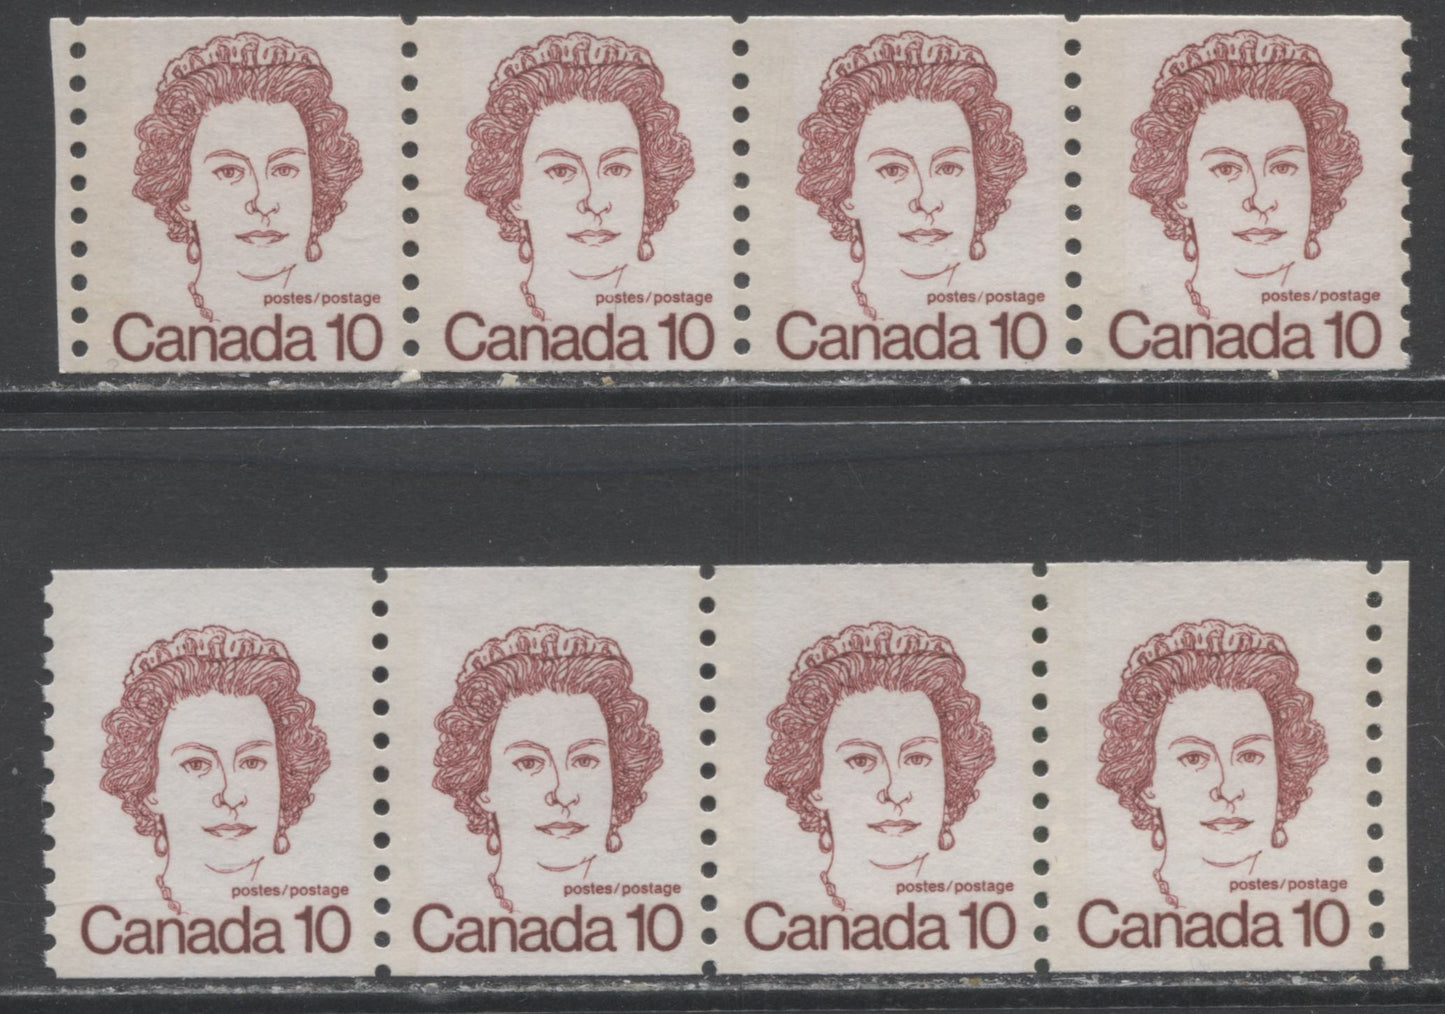 Lot 338 Canada #605iii 10c Dark Carmine Queen Elizabeth II, 1974 - 1976 Caricature Definitives - Coil Stamps Issue, 2 VFNH Strips Of 4 On NF Paper, Extremely Short & Tall Strips